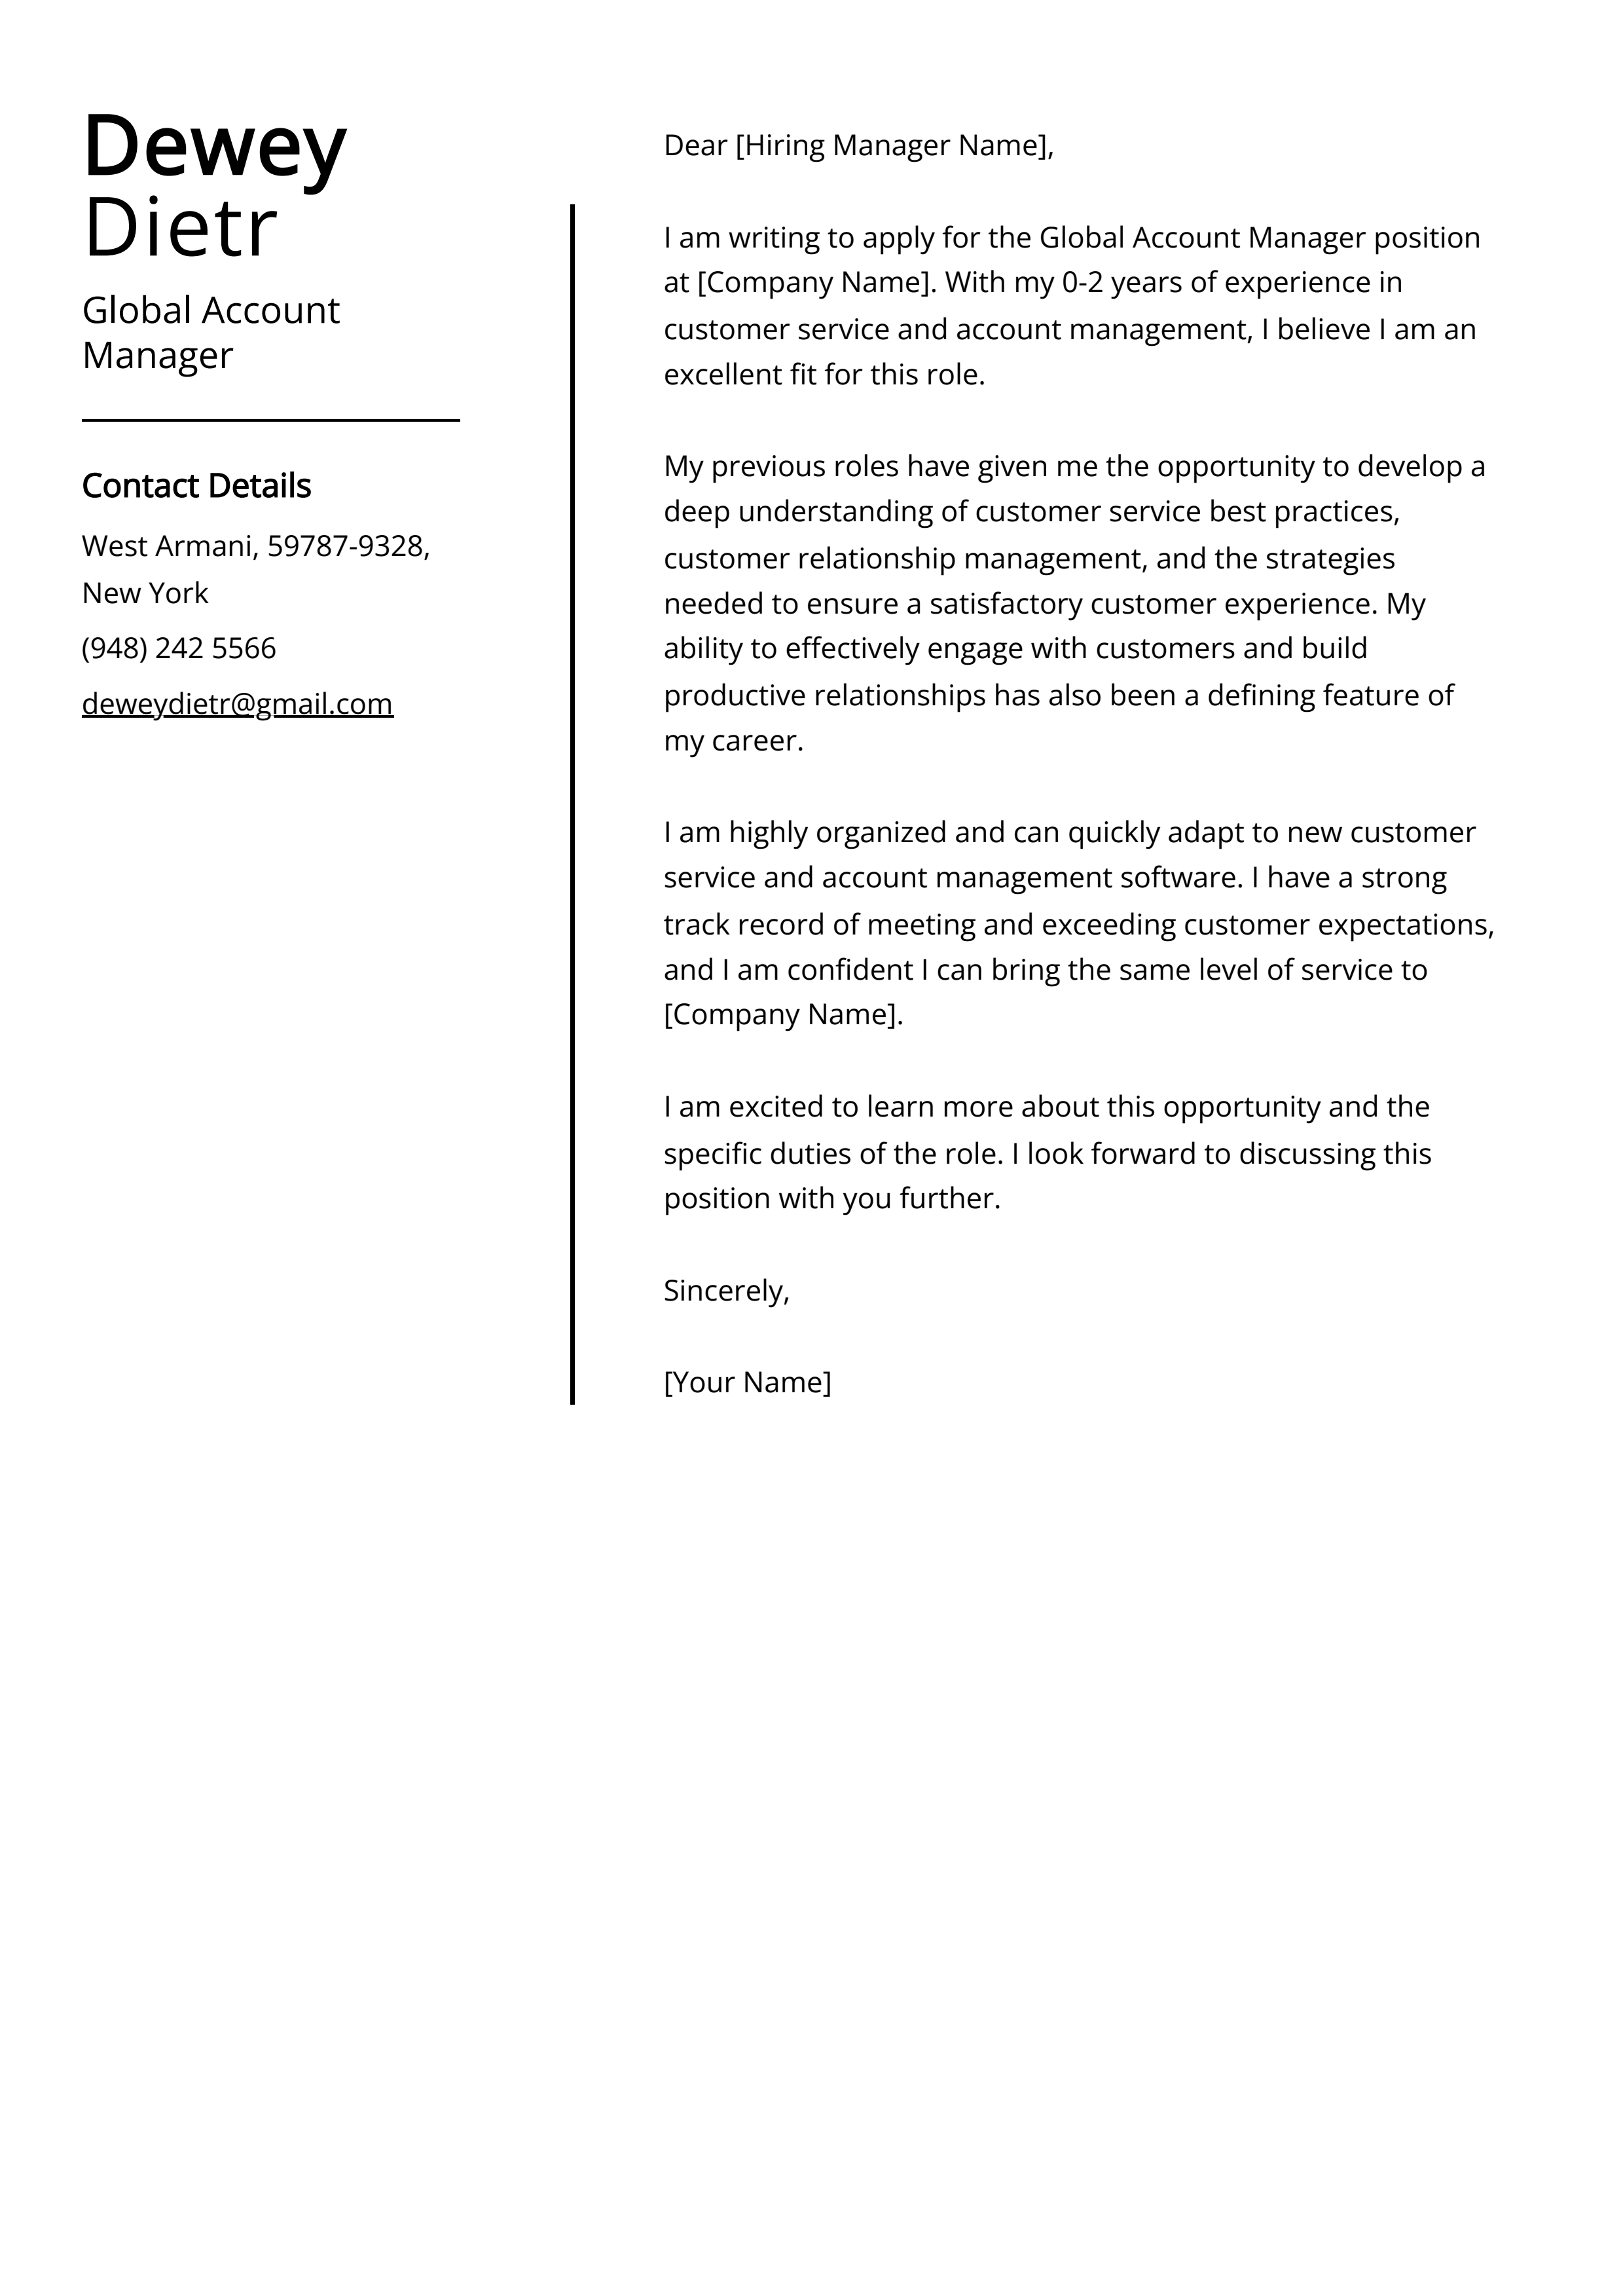 Global Account Manager Cover Letter Example